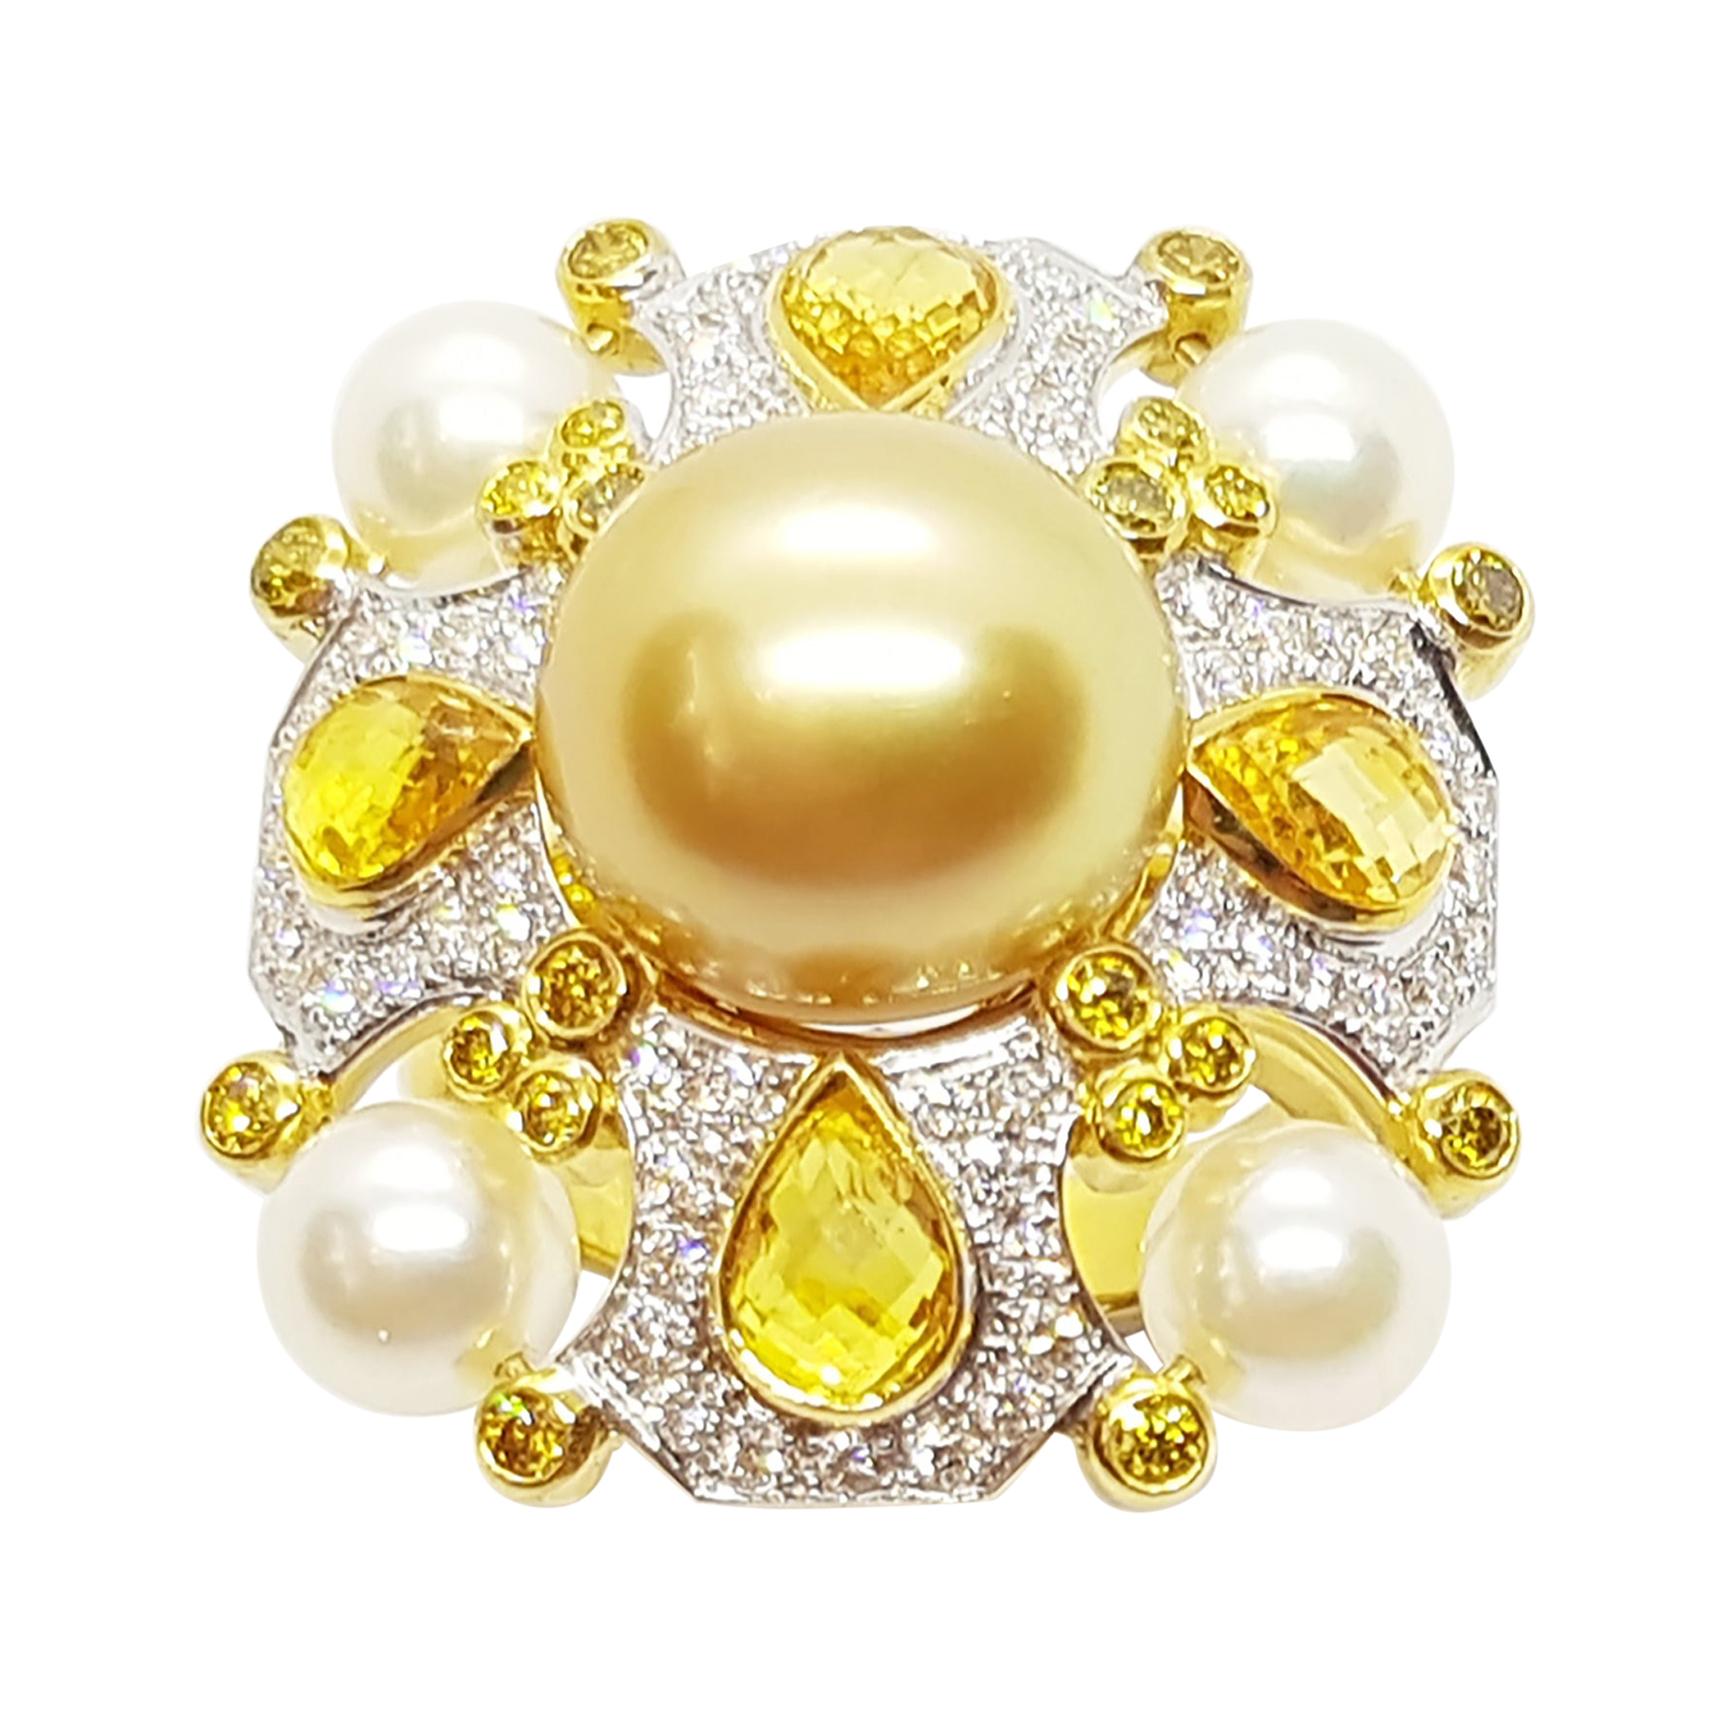 Golden South Sea Pearl, Fresh Water Pearl, Yellow Sapphire Ring in 18k Gold